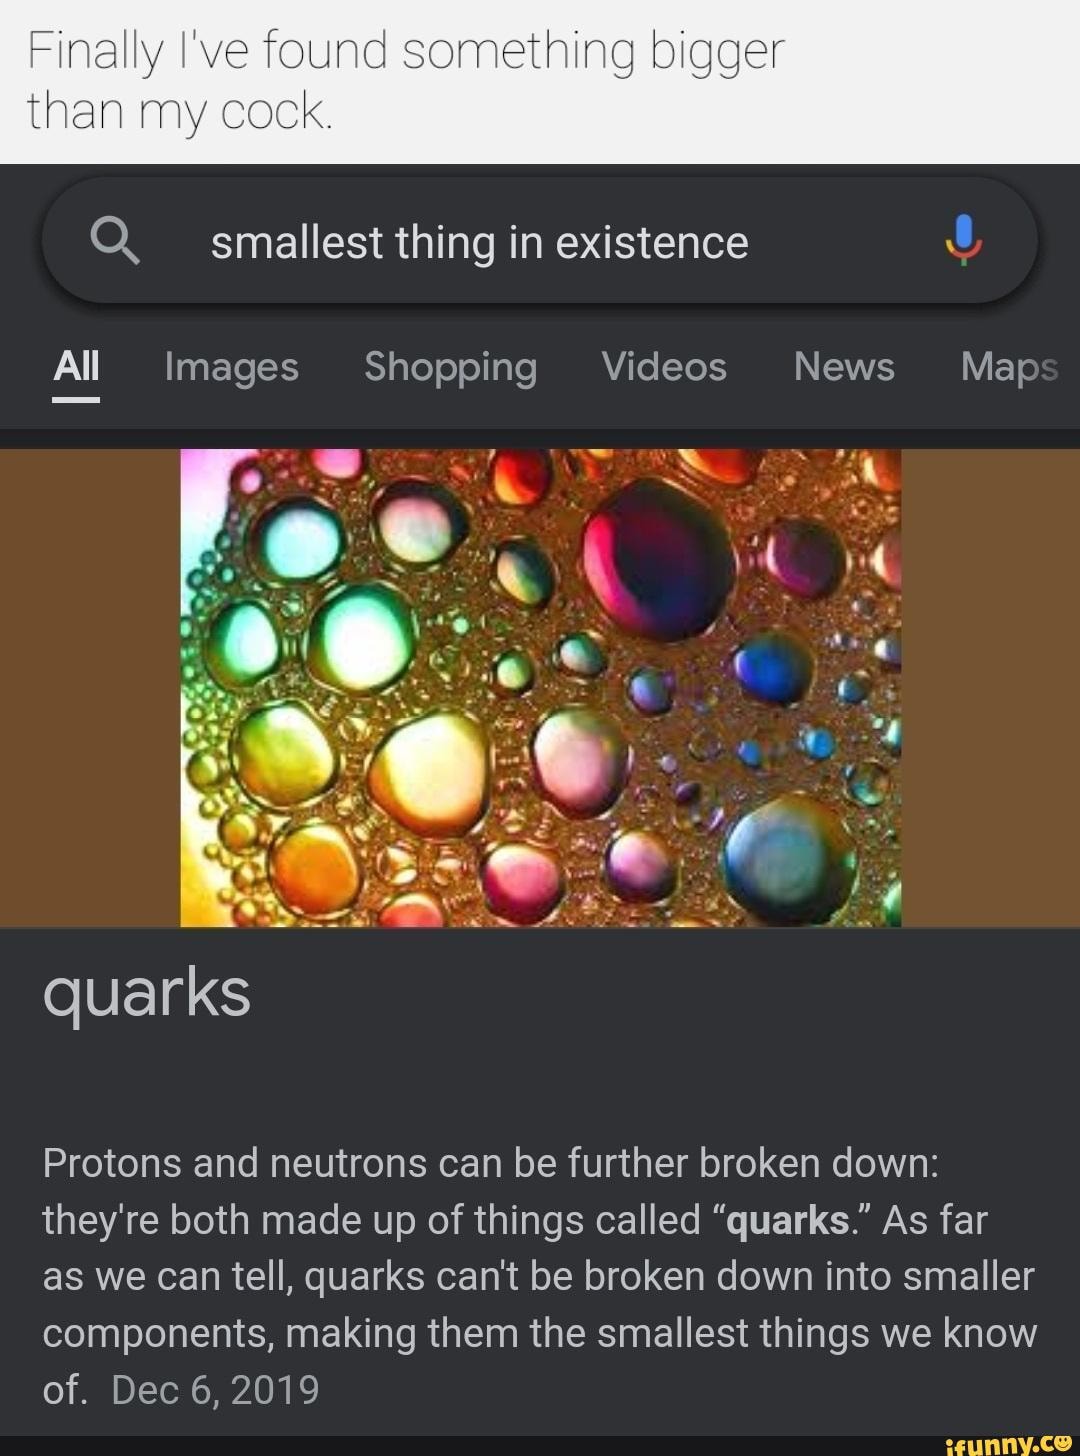 is there anything smaller than a quark